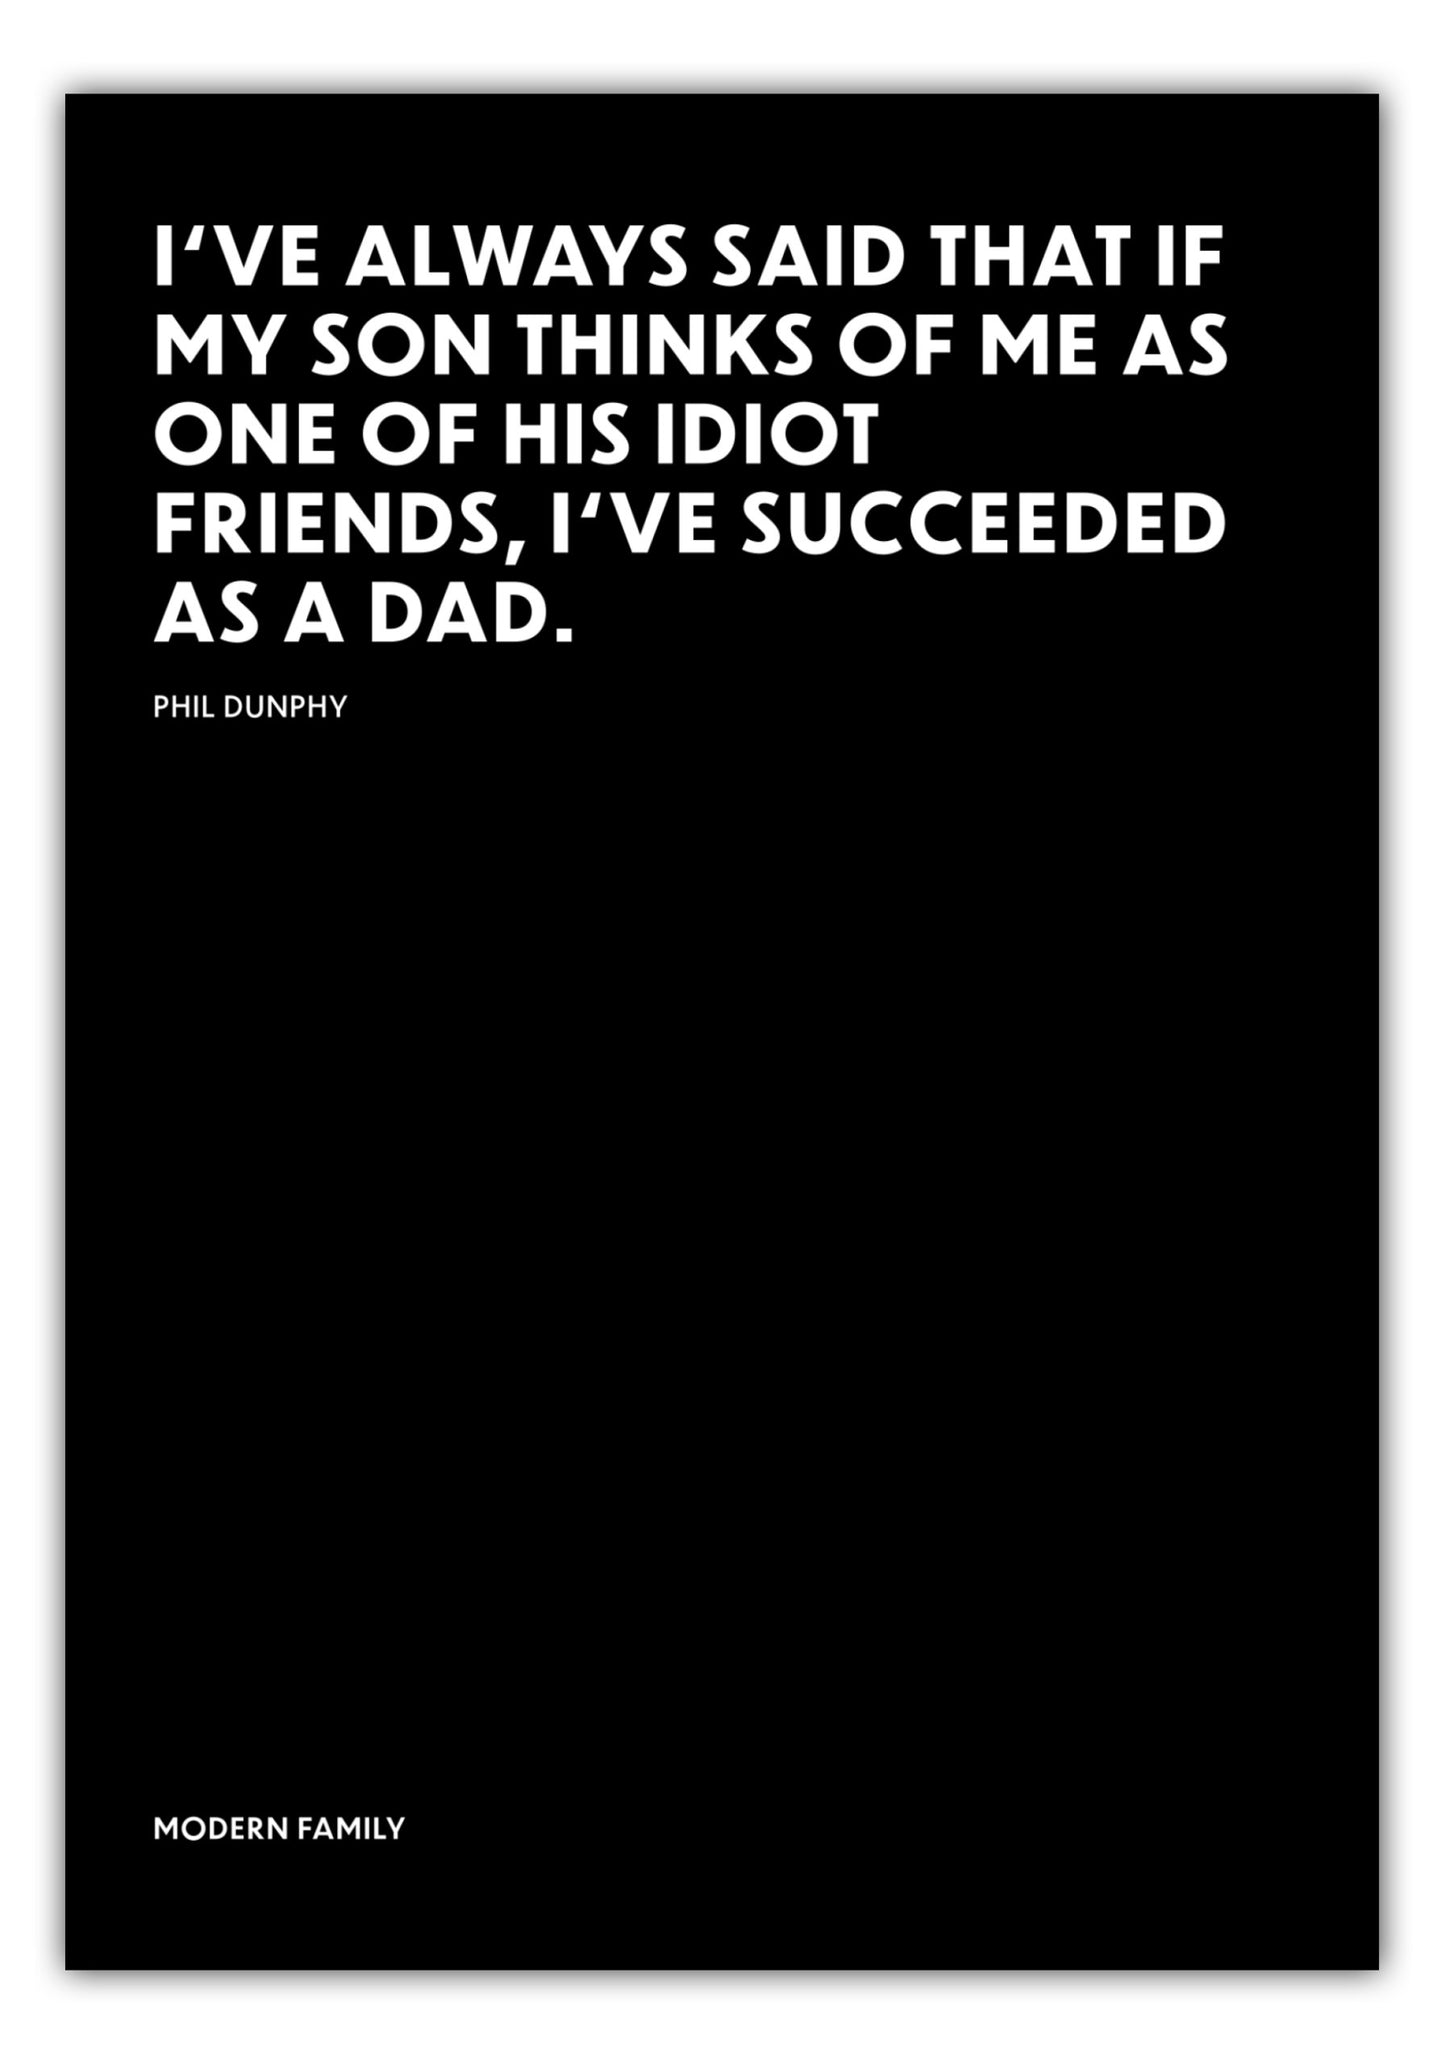 Poster Succeeded as a dad - Phil Dunphy - Modern Family